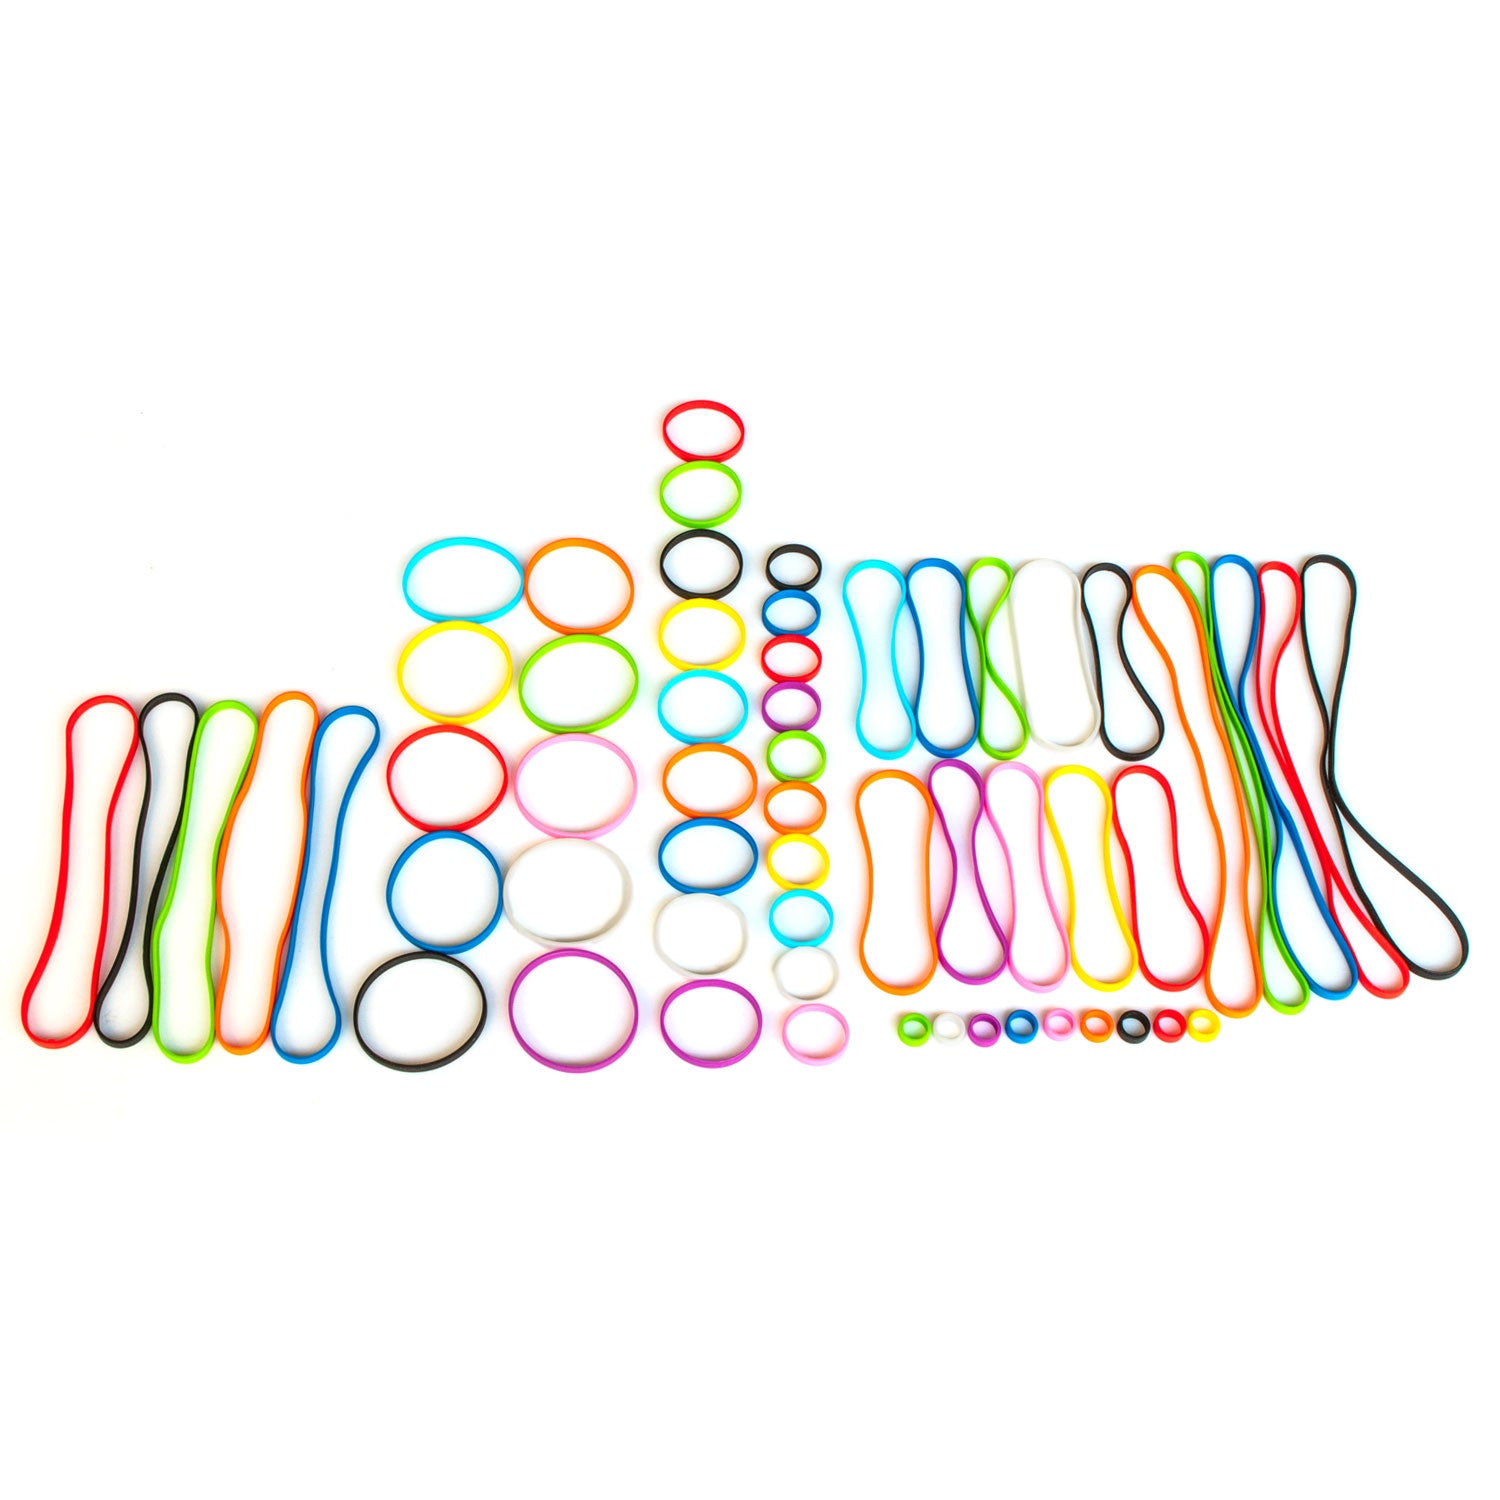 Grifiti Band Joes 0.8 x 0.25 inch Small Elastic Silicone Rubber Bands Rings Gasket Food Cooking Durable Office Boxes Wraps 20 Pack Assorted Colorful